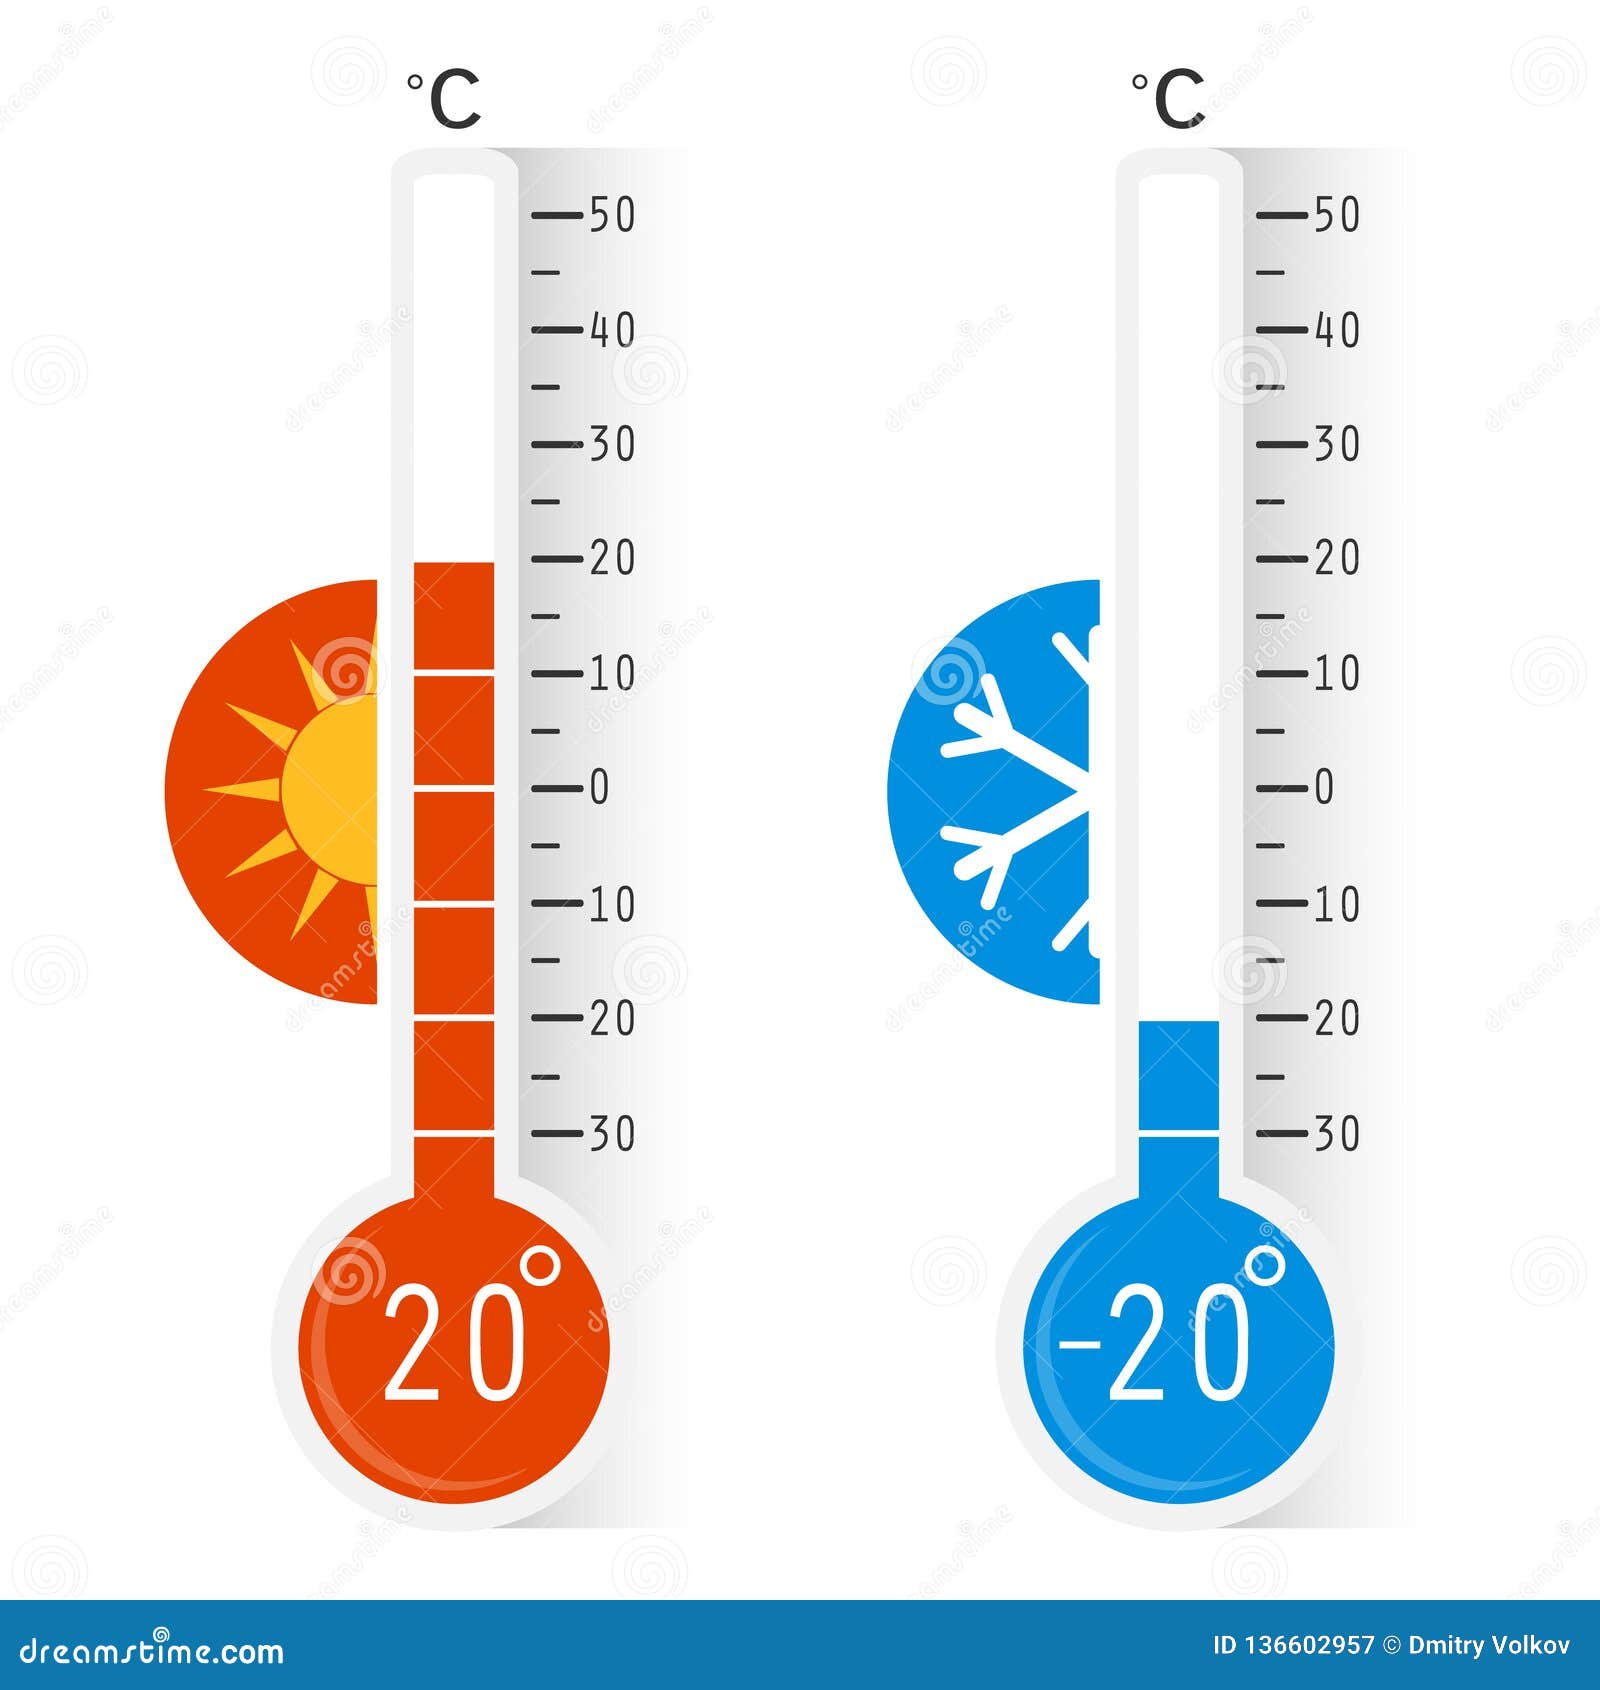 https://thumbs.dreamstime.com/z/celsius-meteorology-thermometers-measuring-heat-cold-vector-illustration-thermometer-hot-equipment-showing-weather-136602957.jpg